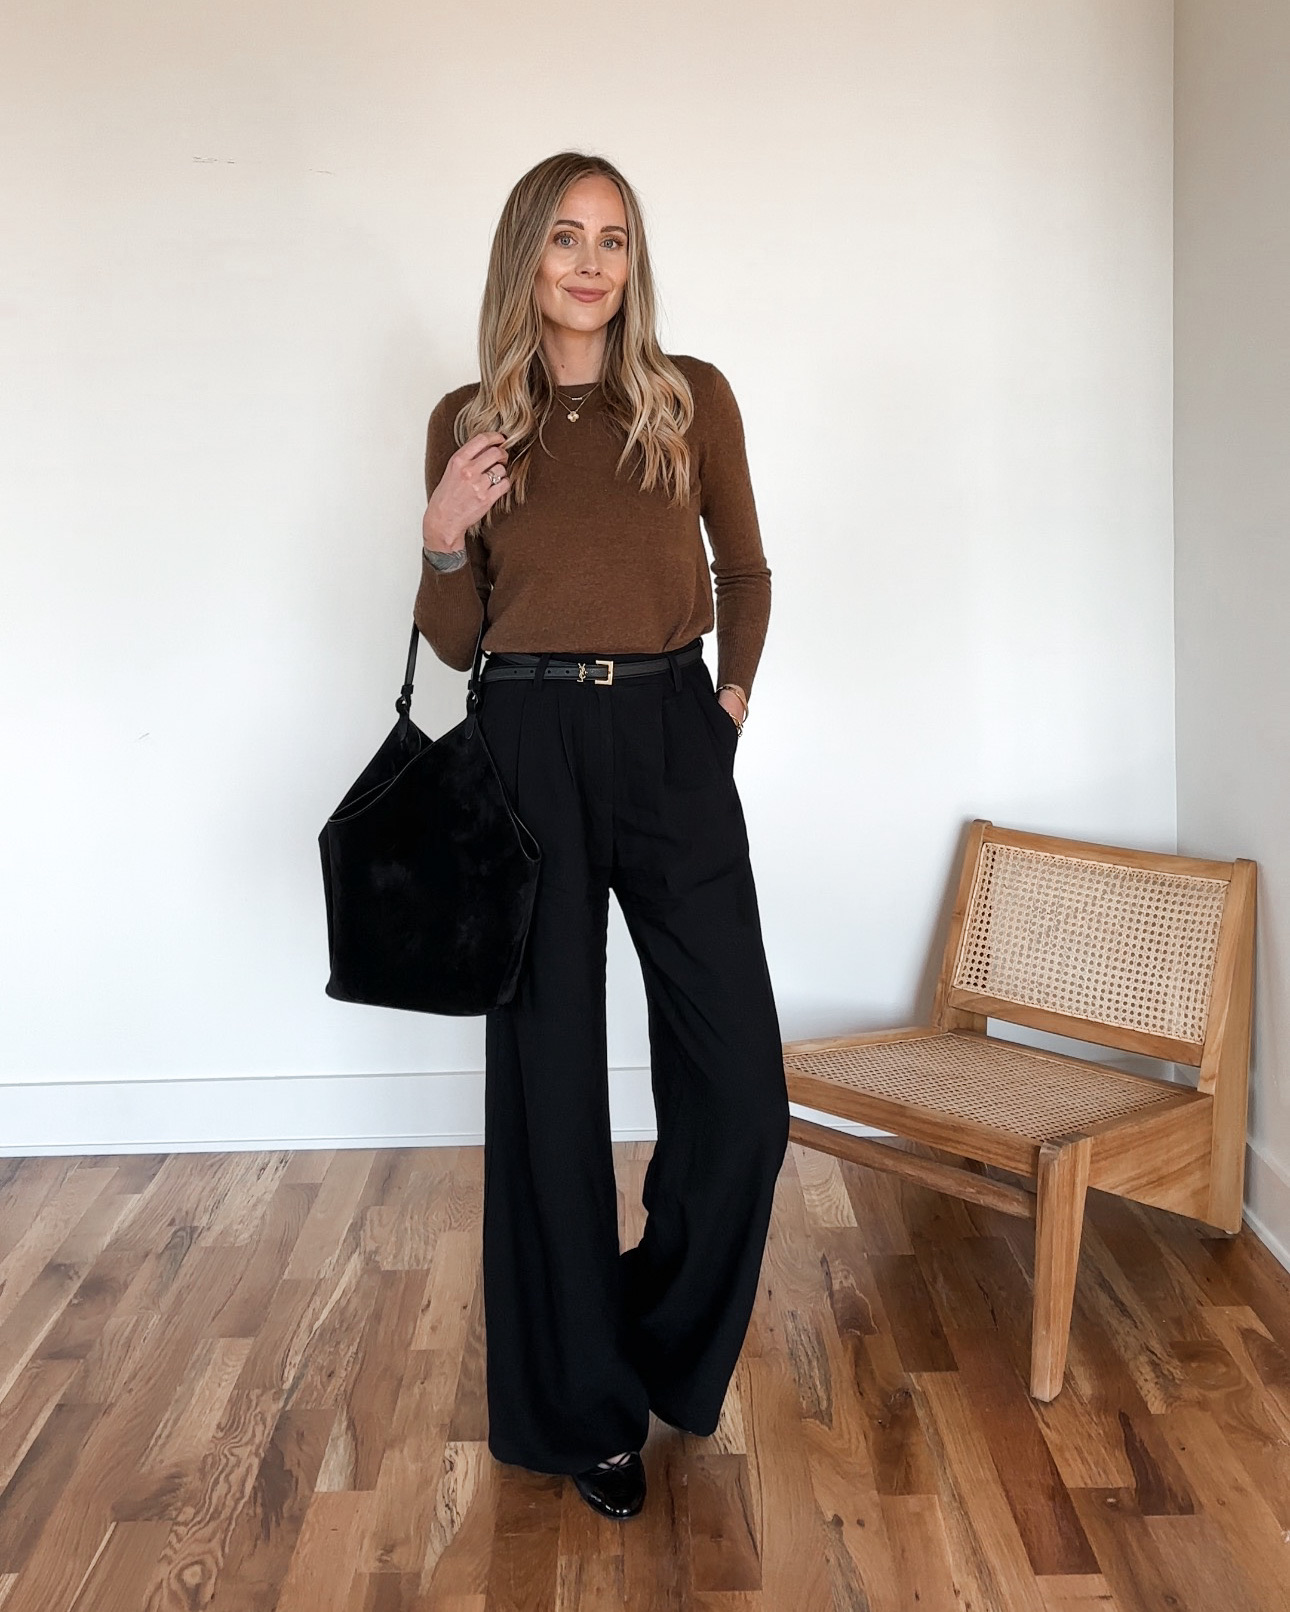 Fashion Jackson Wearing Jcrew Brown Cashmere Sweater Black Wide Leg Trousers Chanel Black Ballet Flats Khaite Lotus Tote Black Suede Business Casual Fall Workwear Outfit Idea